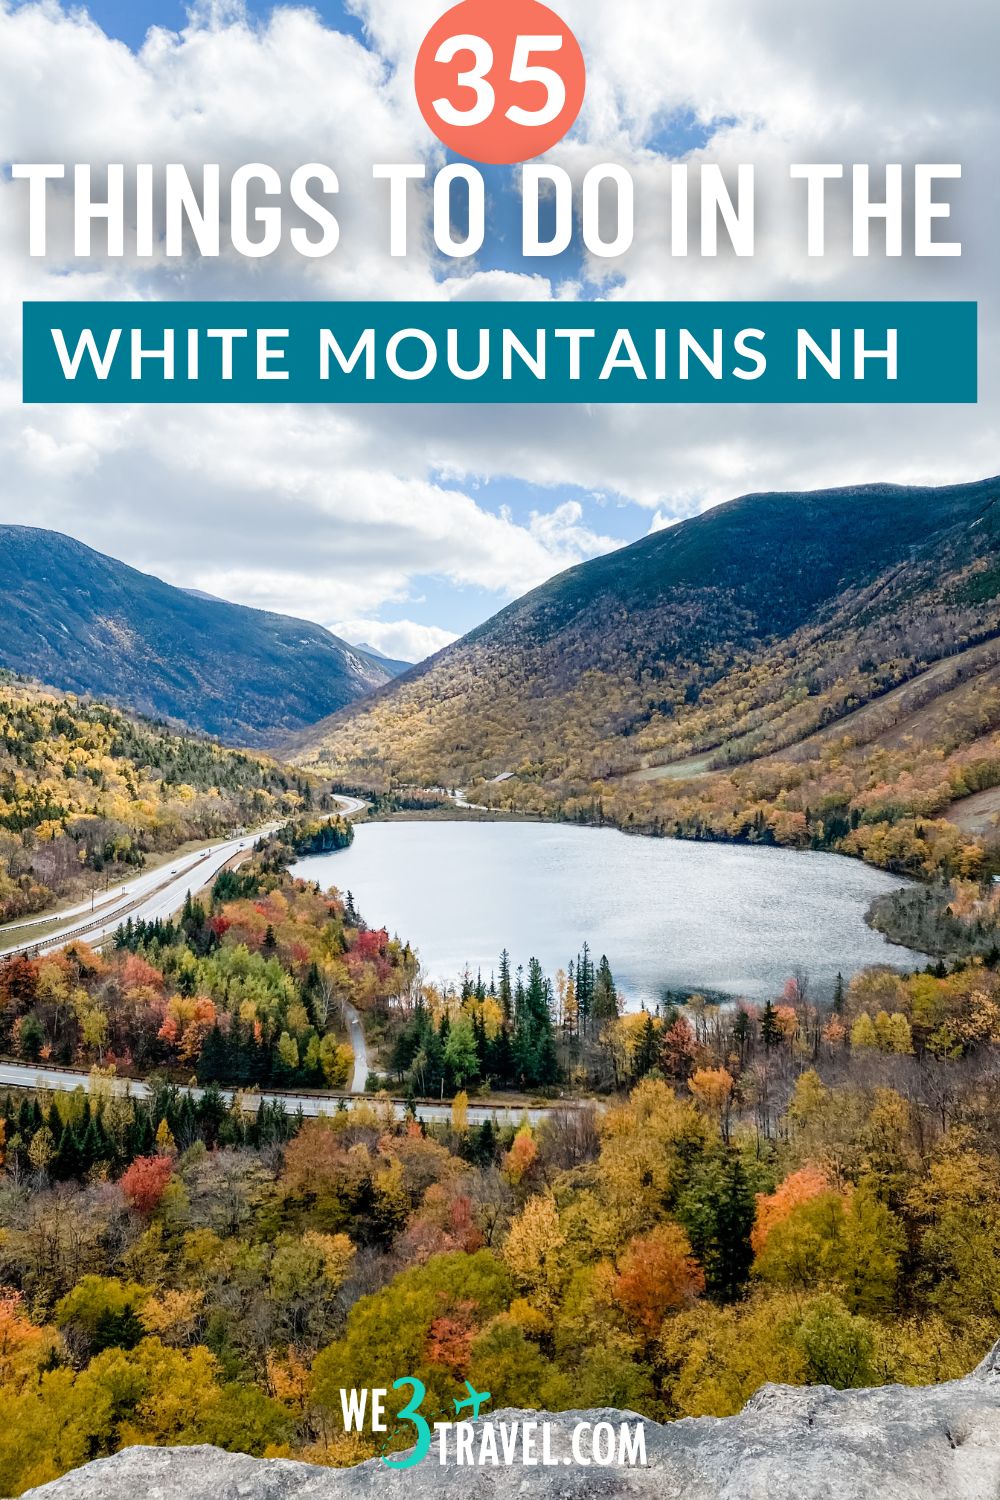 Complete White Mountains New Hampshire destination guide with the best things to do in the White Mountains including must-visit attractions to the best short hikes, thrilling outdoor adventures, cozy places to stay, estaurant recommendations, and invaluable travel tips. Plan your New Hampshire vacation or White Mountains weekend getaway with this travel guide.